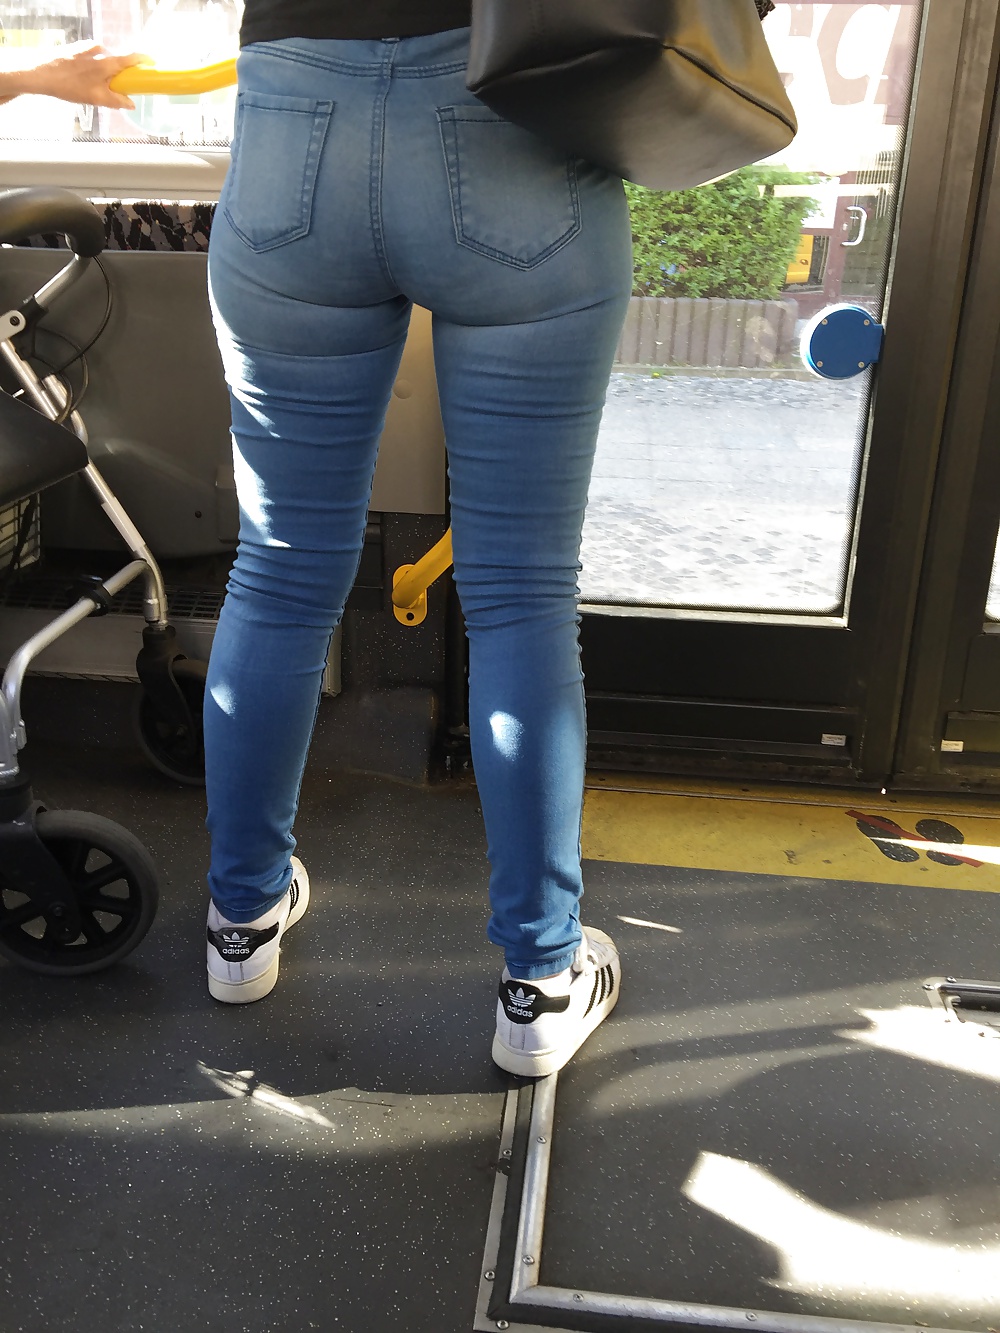 Sexy_Ass_in_tight_Jeans_-_Berlin_Bus (8/8)